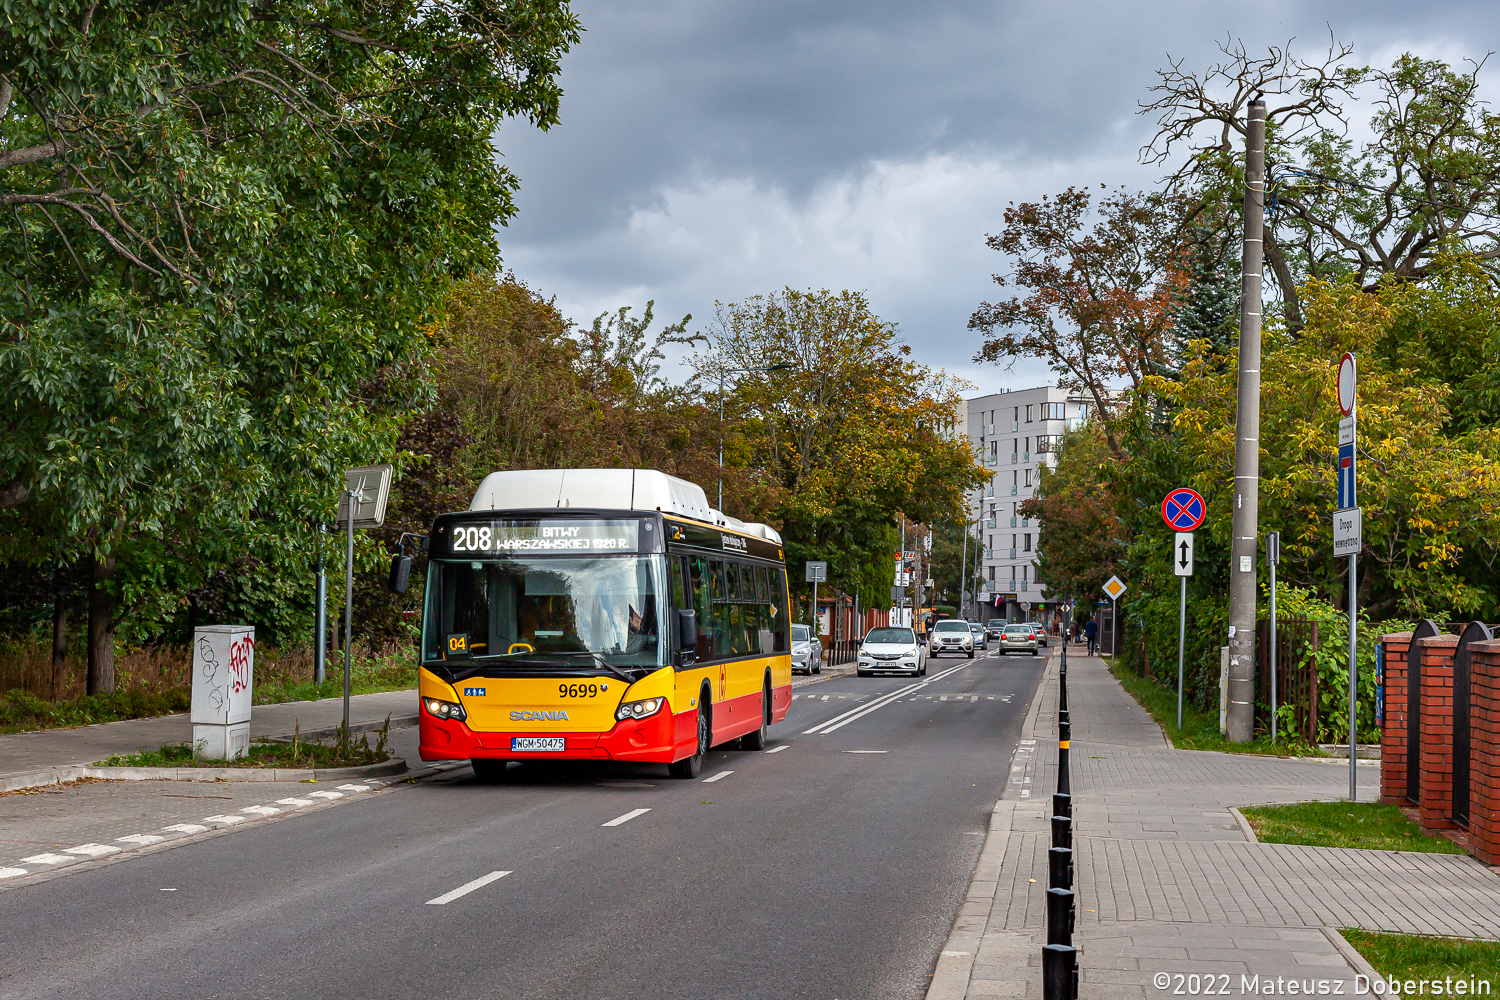 Warsaw, Scania Citywide LF CNG # 9699